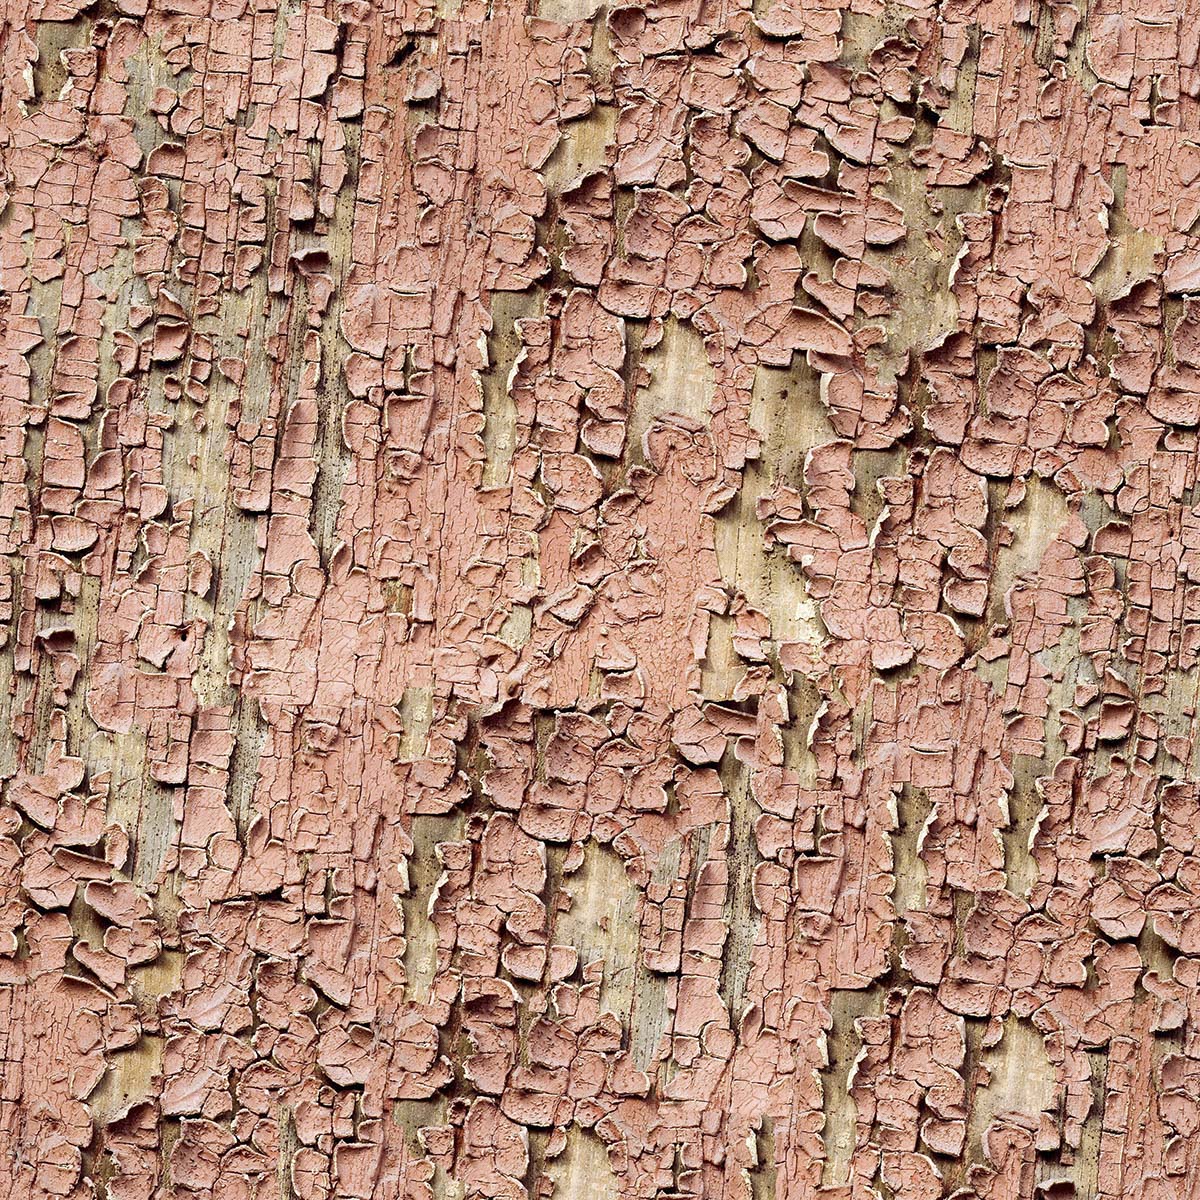 A close up of a wood surface